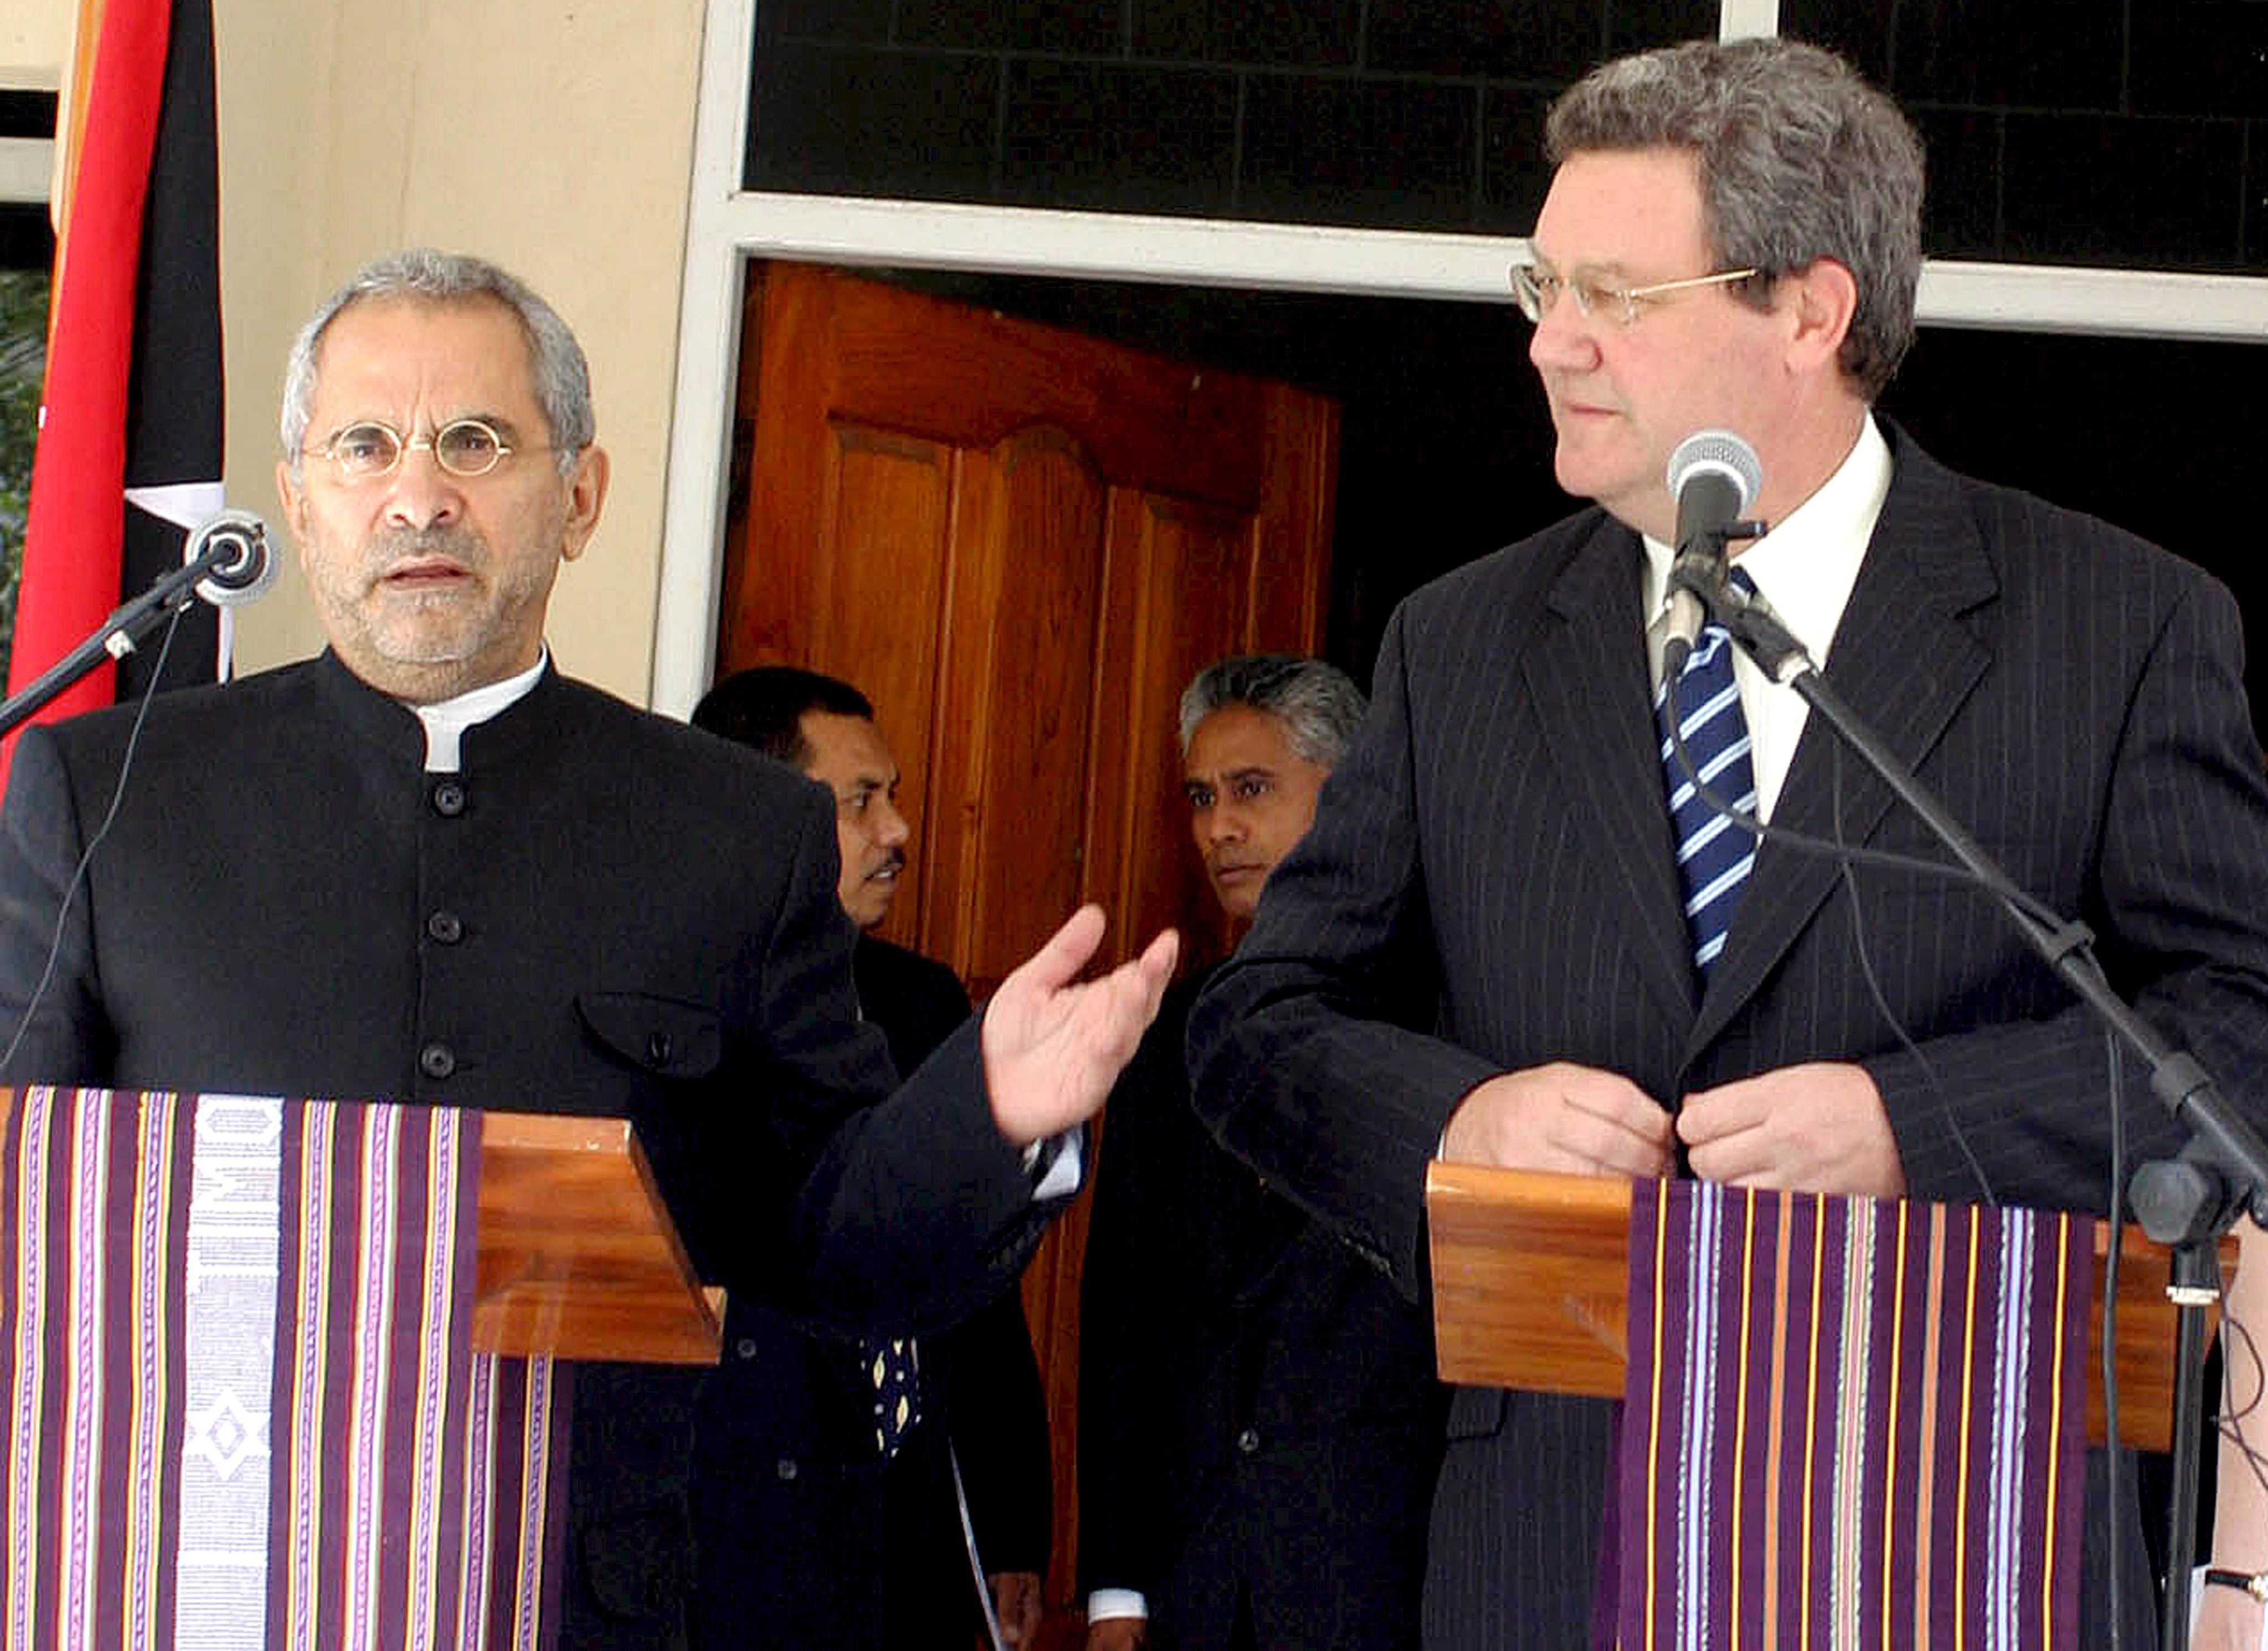 Then East Timorese President Ramos Horta and Foreign Minister Alexander Downer in Dilli, East Timor in 2007.